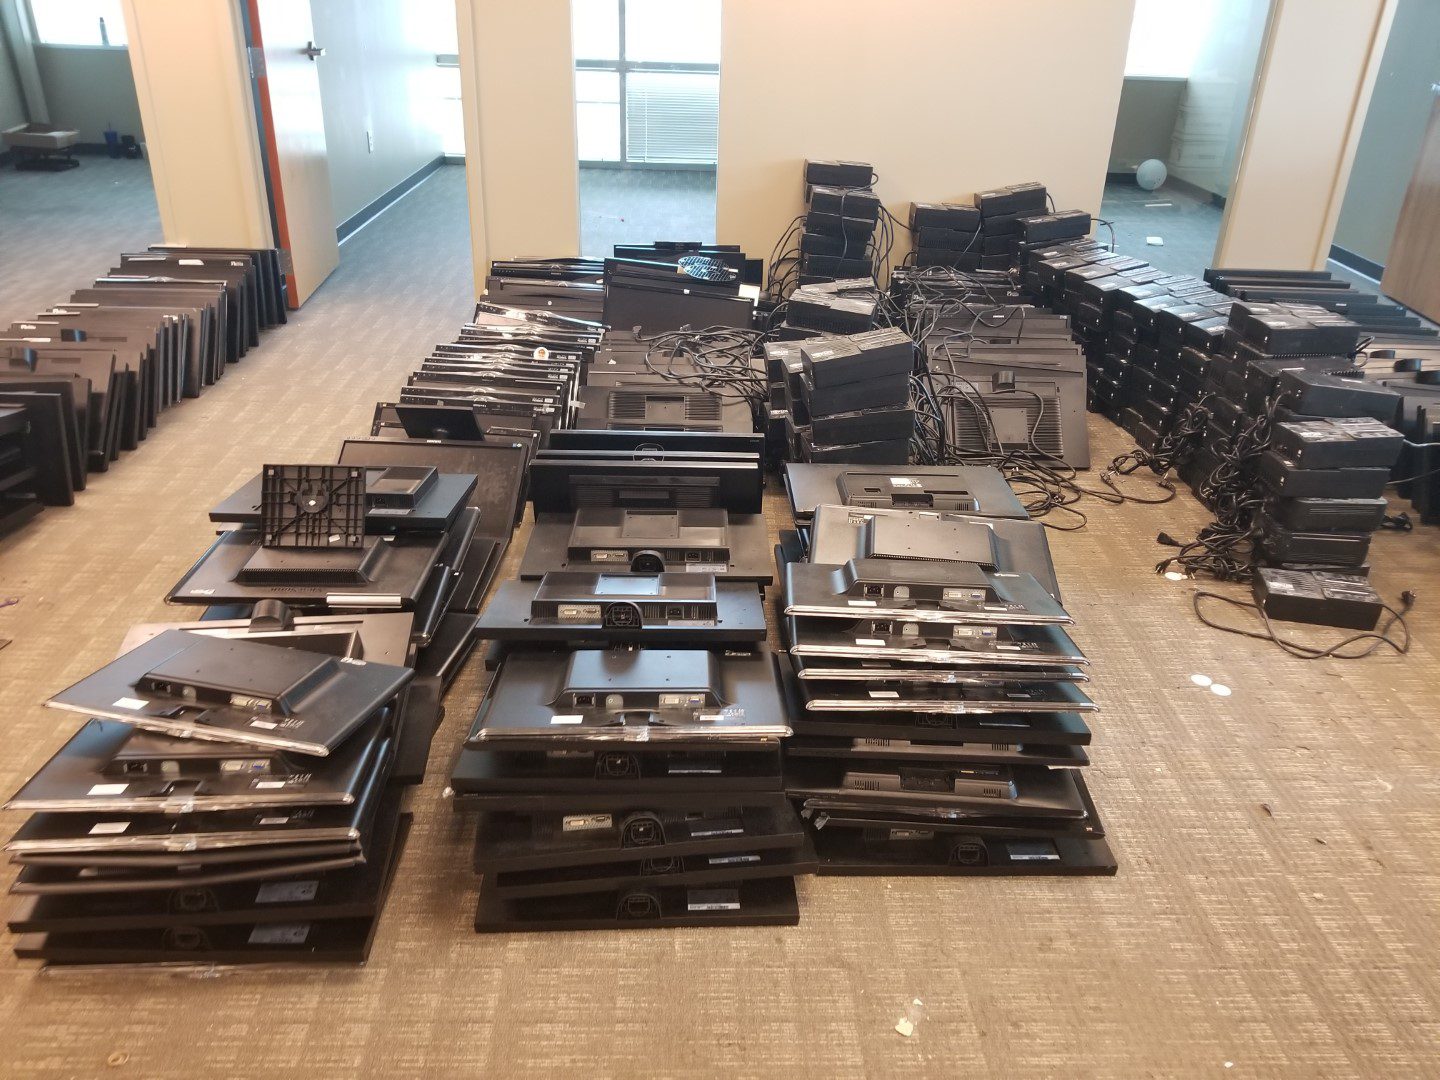 Consequences of Not Recycling Computers